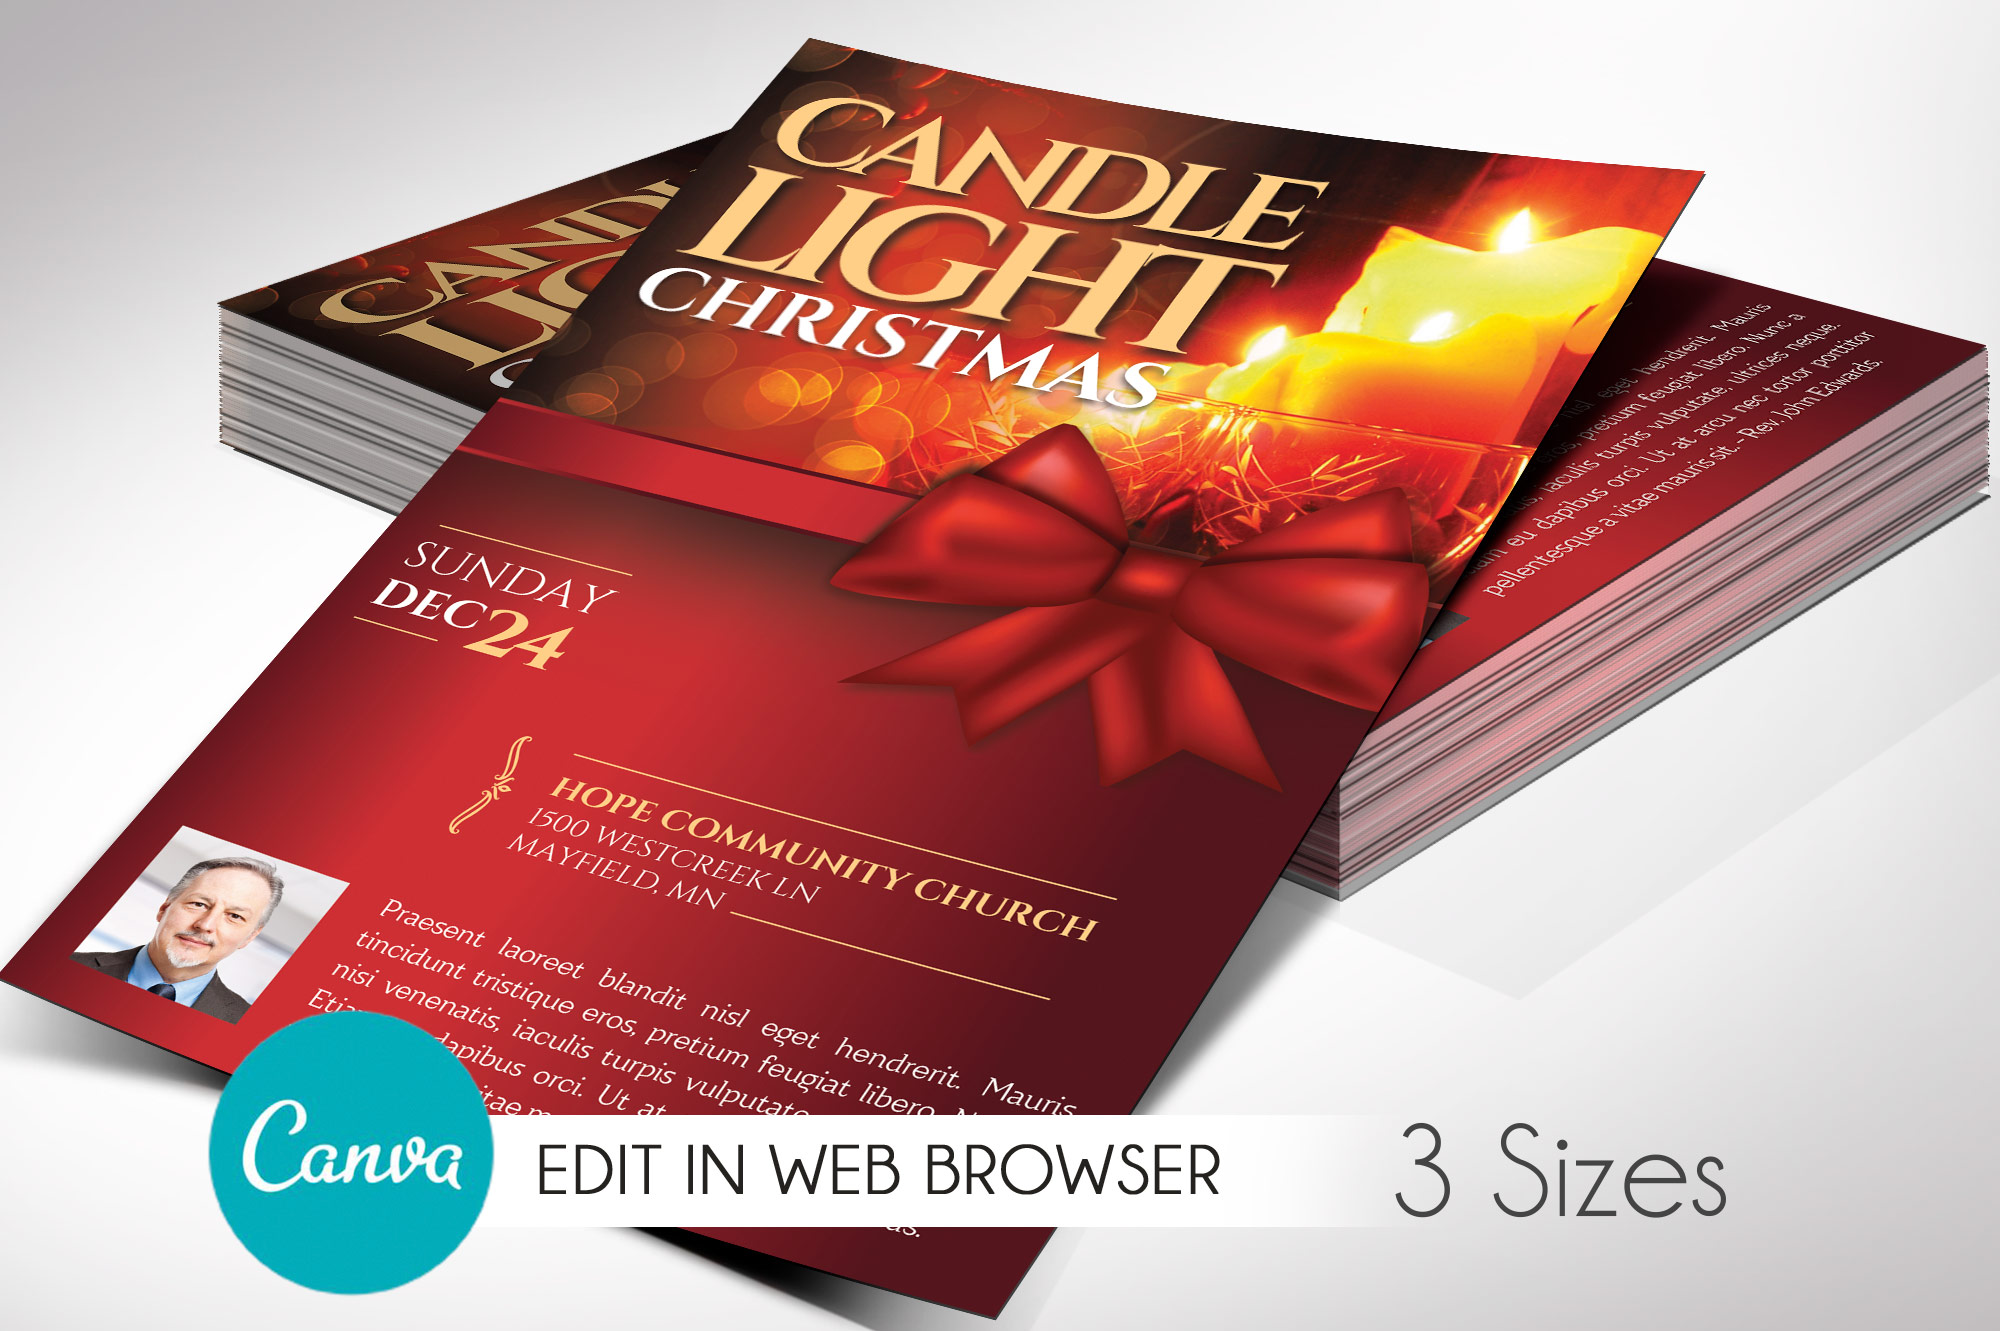 Candlelight Christmas Flyer Canva Template